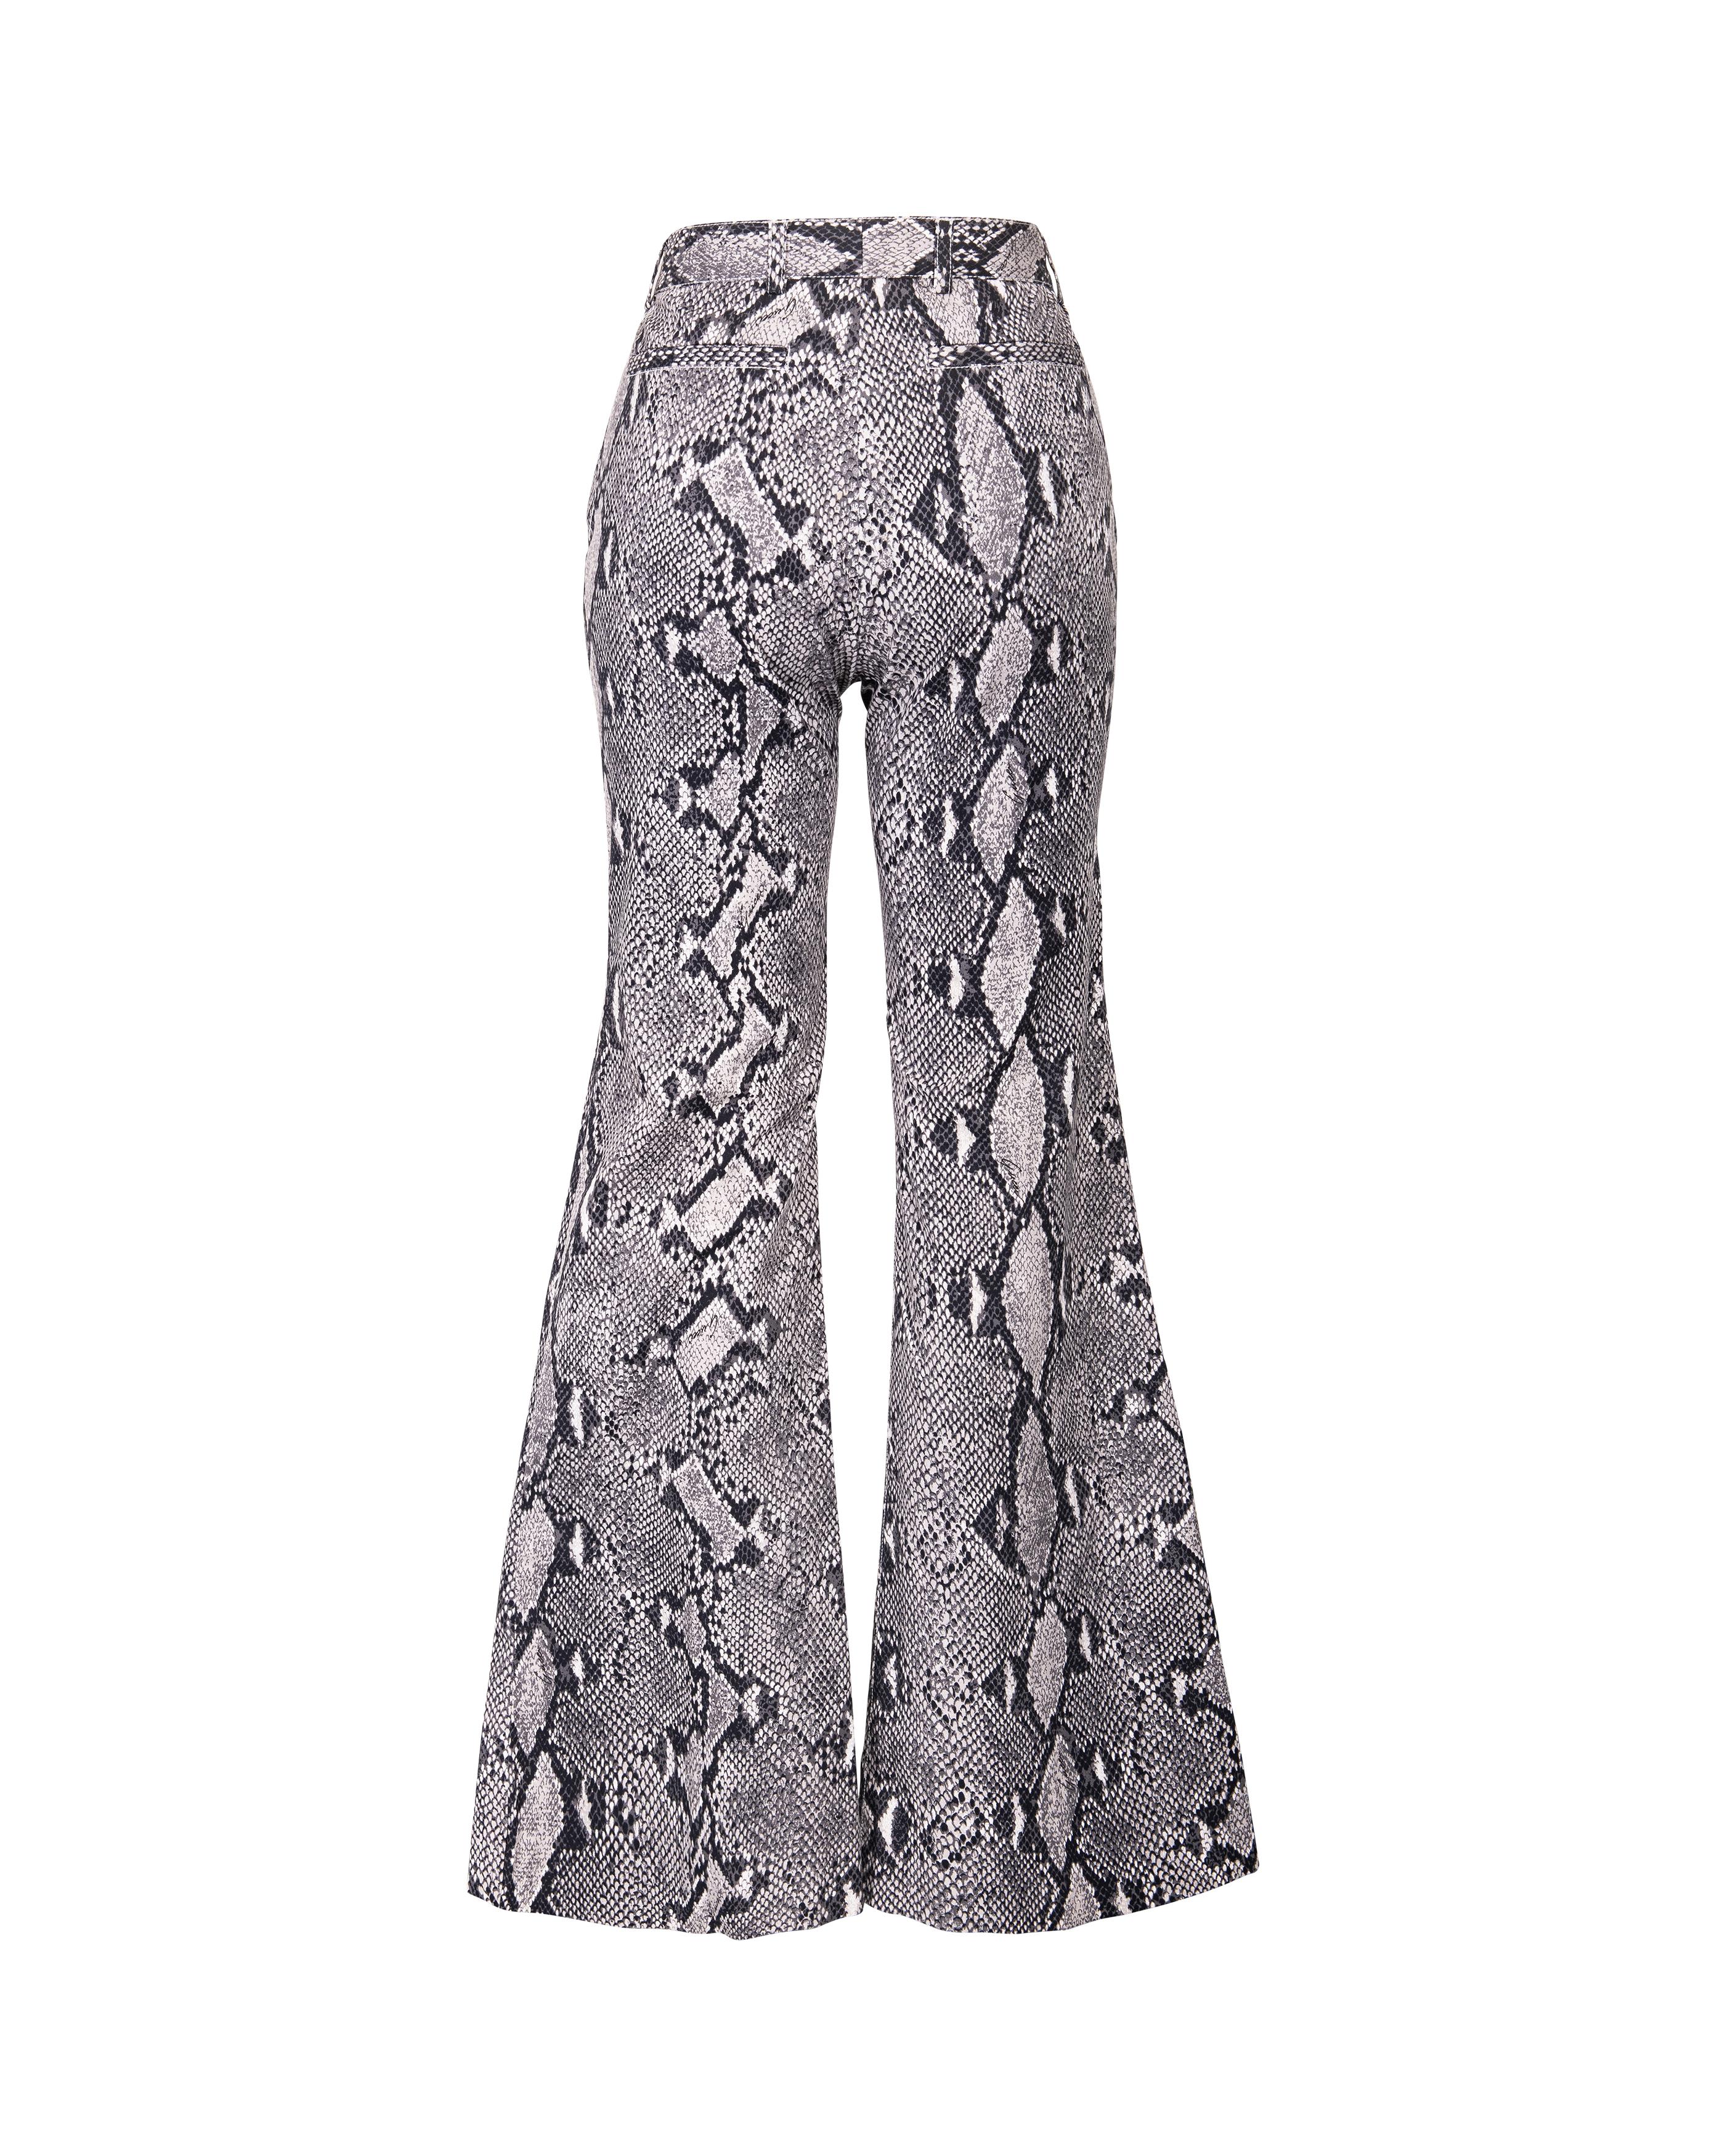 Women's S/S 2000 Gucci by Tom Ford Gray Snakeskin Flare Trousers